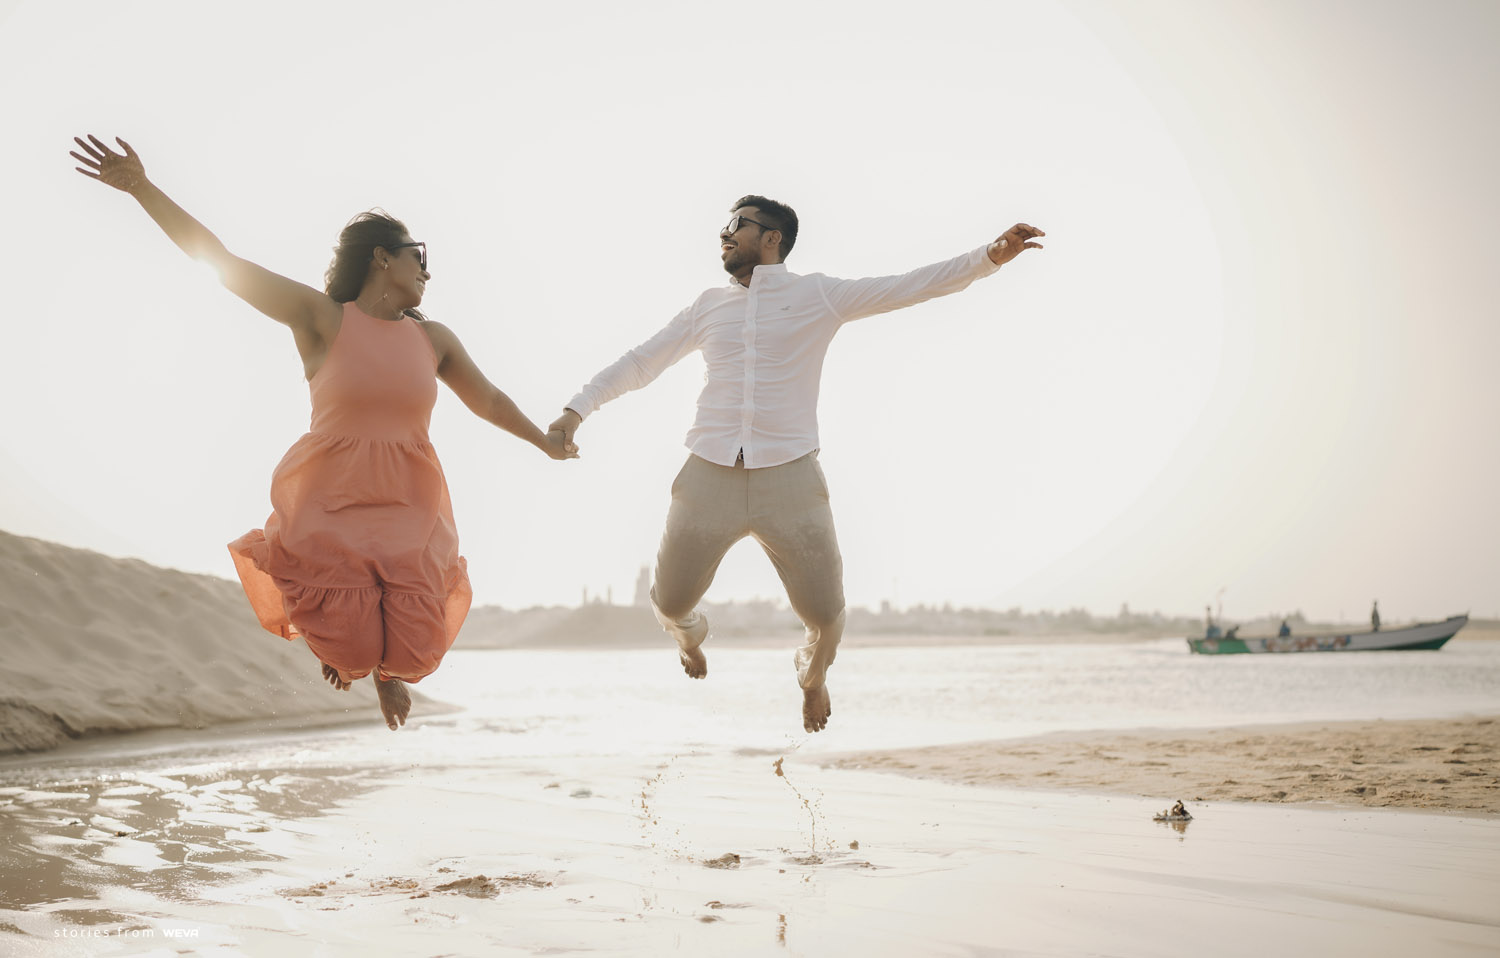 7 Tips to Have the Best Beach Photoshoot | Flytographer-cheohanoi.vn